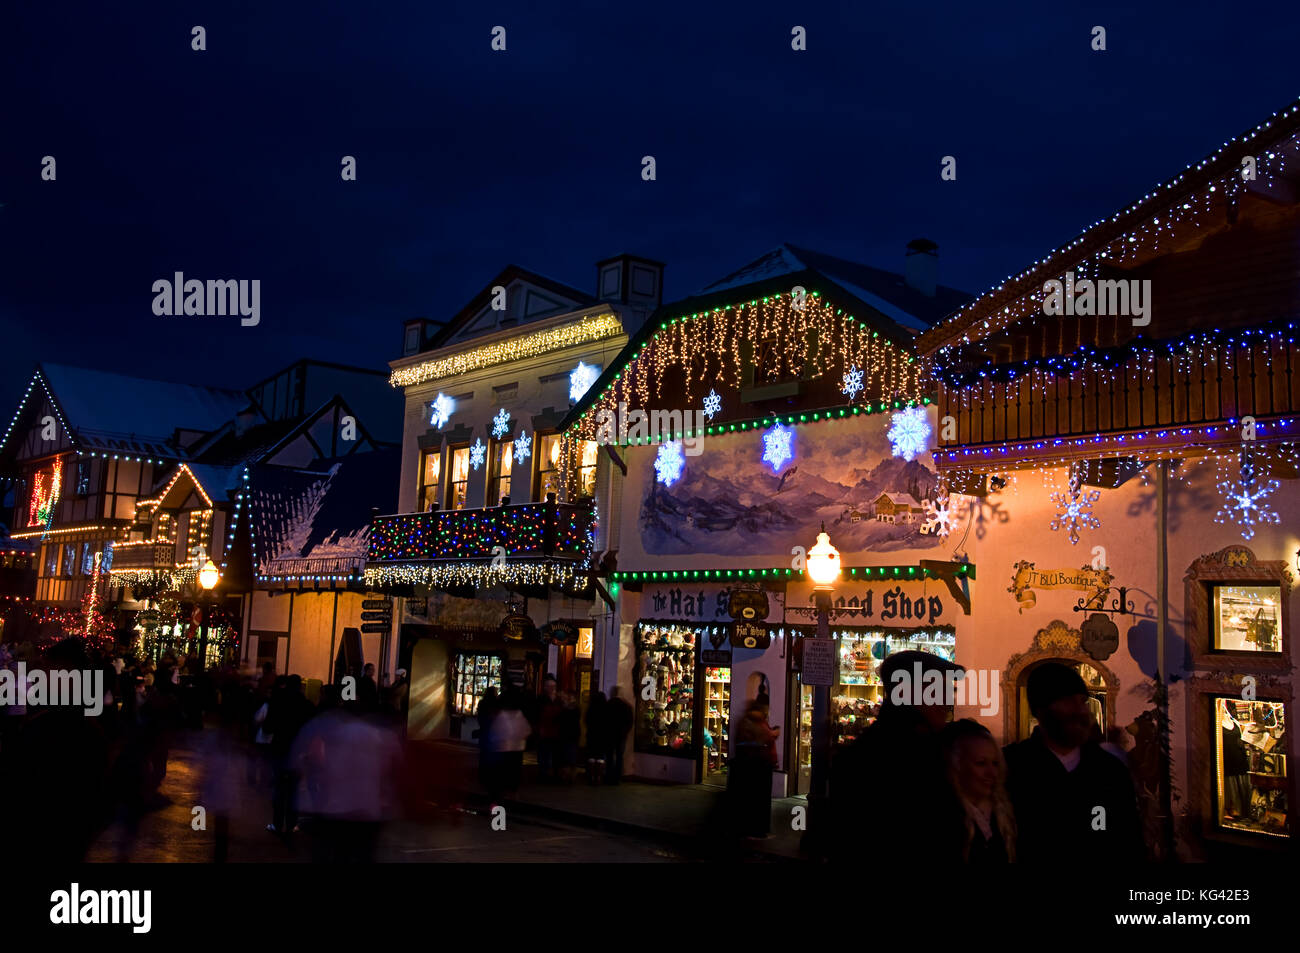 This is a Bavarian store lit up with Christmas lights at night with shoppers.  Very popular tourist attraction in Leavenworth, Washington USA. Stock Photo